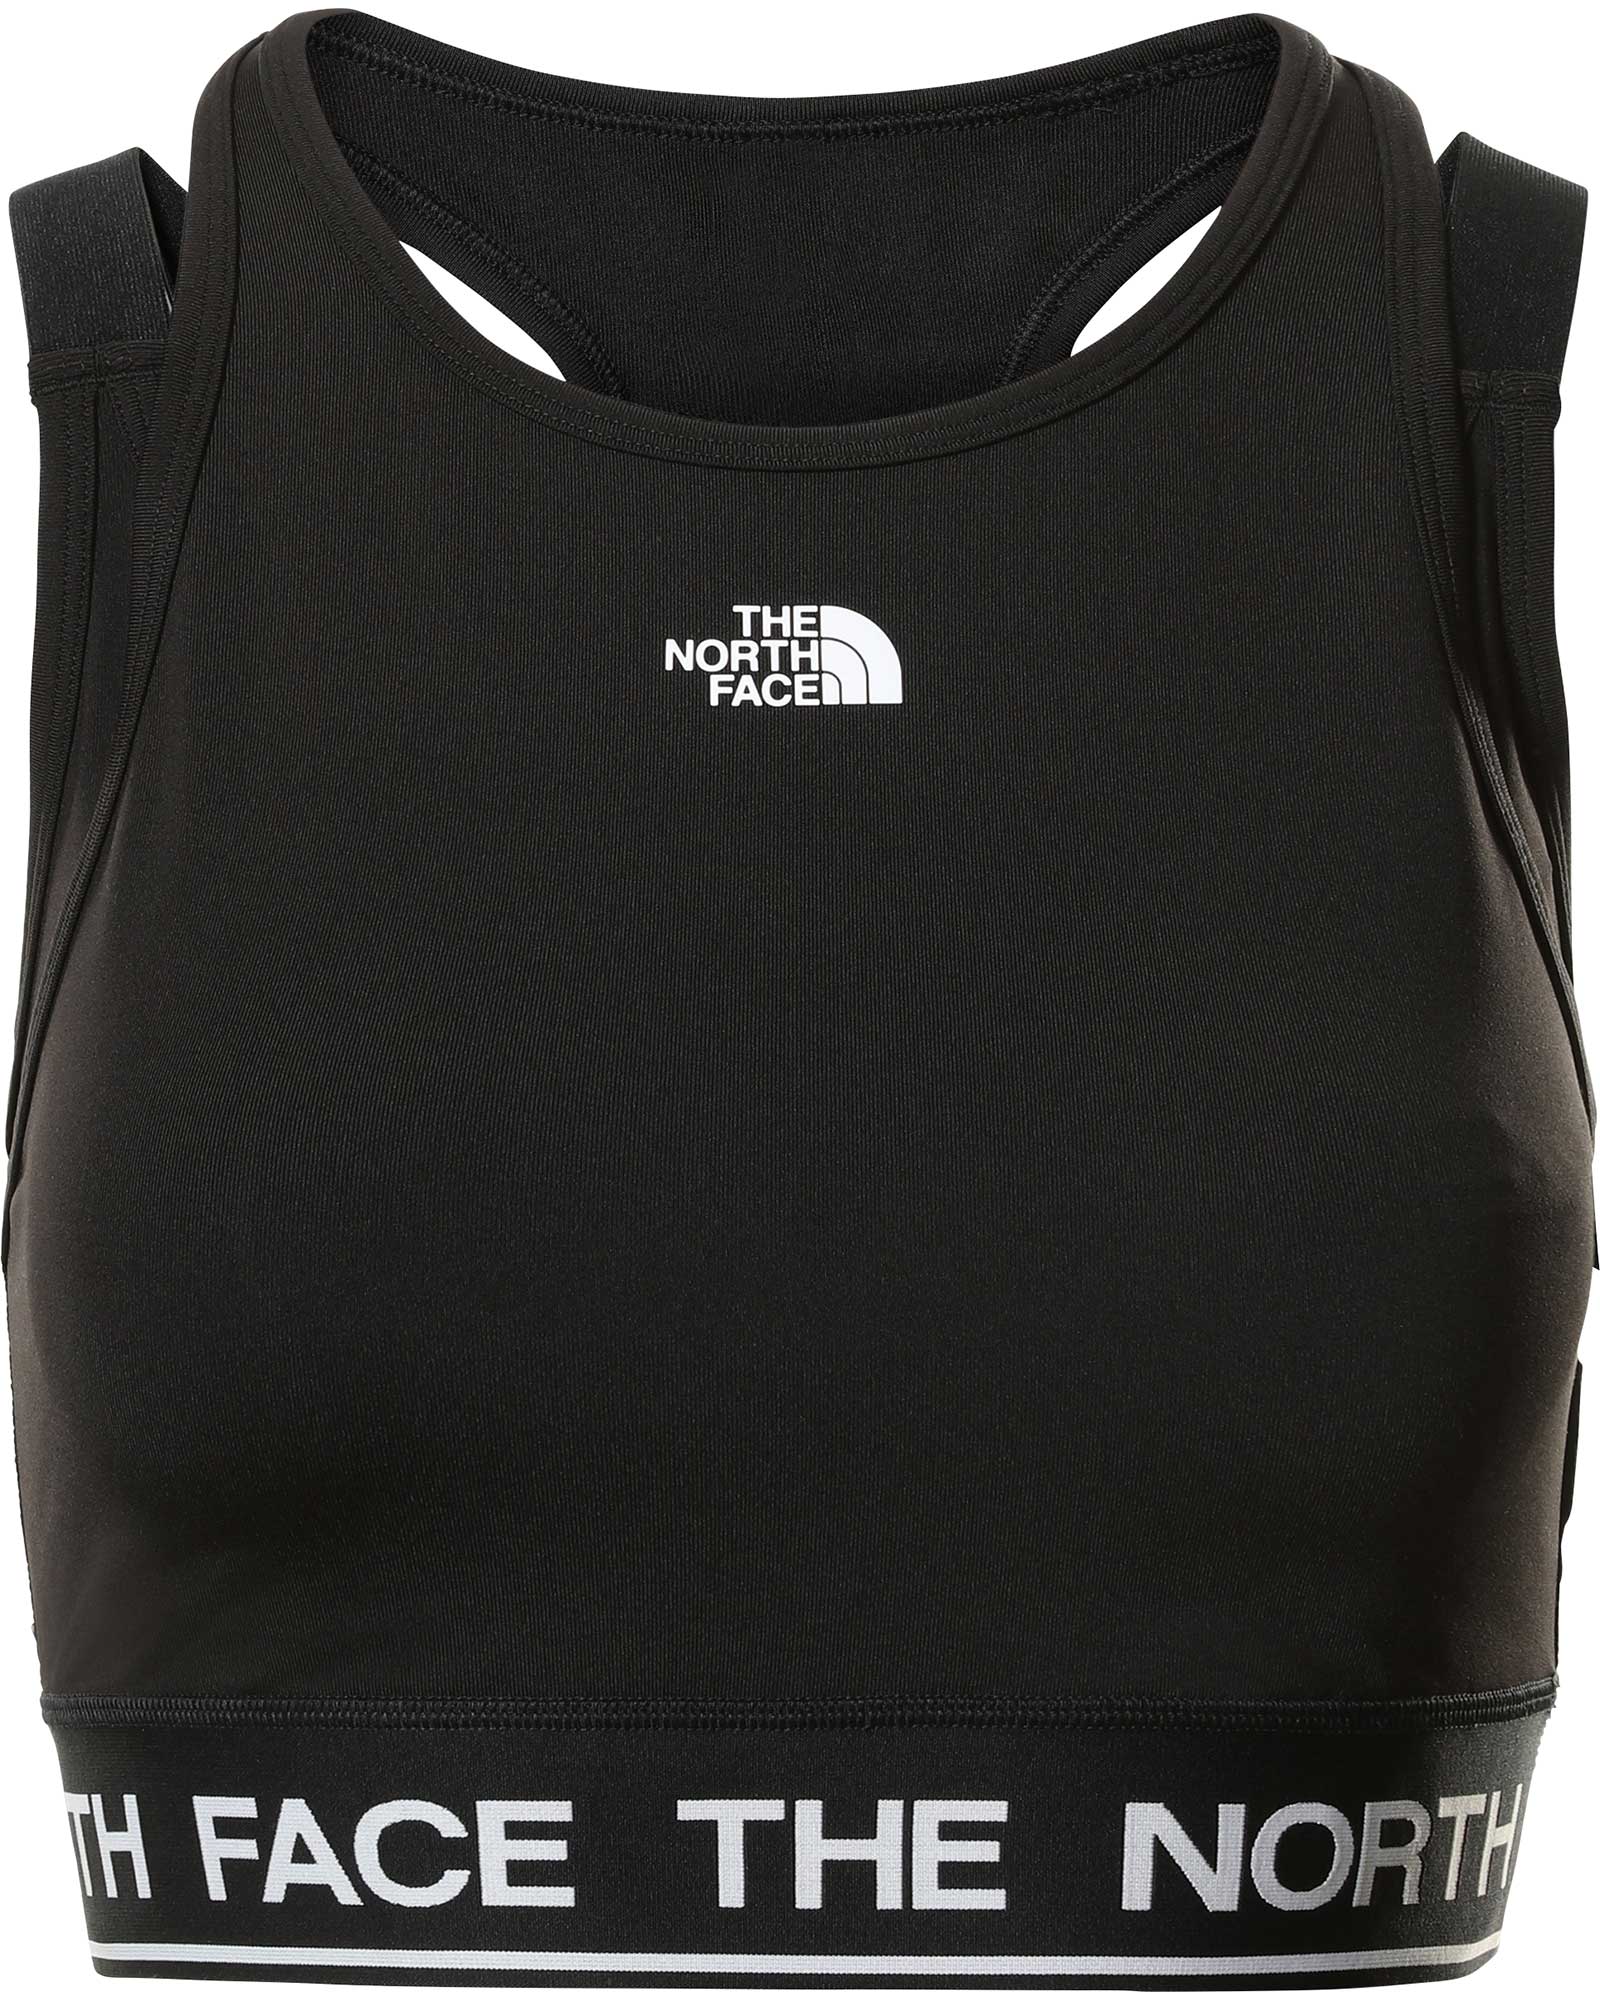 The North Face Womens Tech Tank